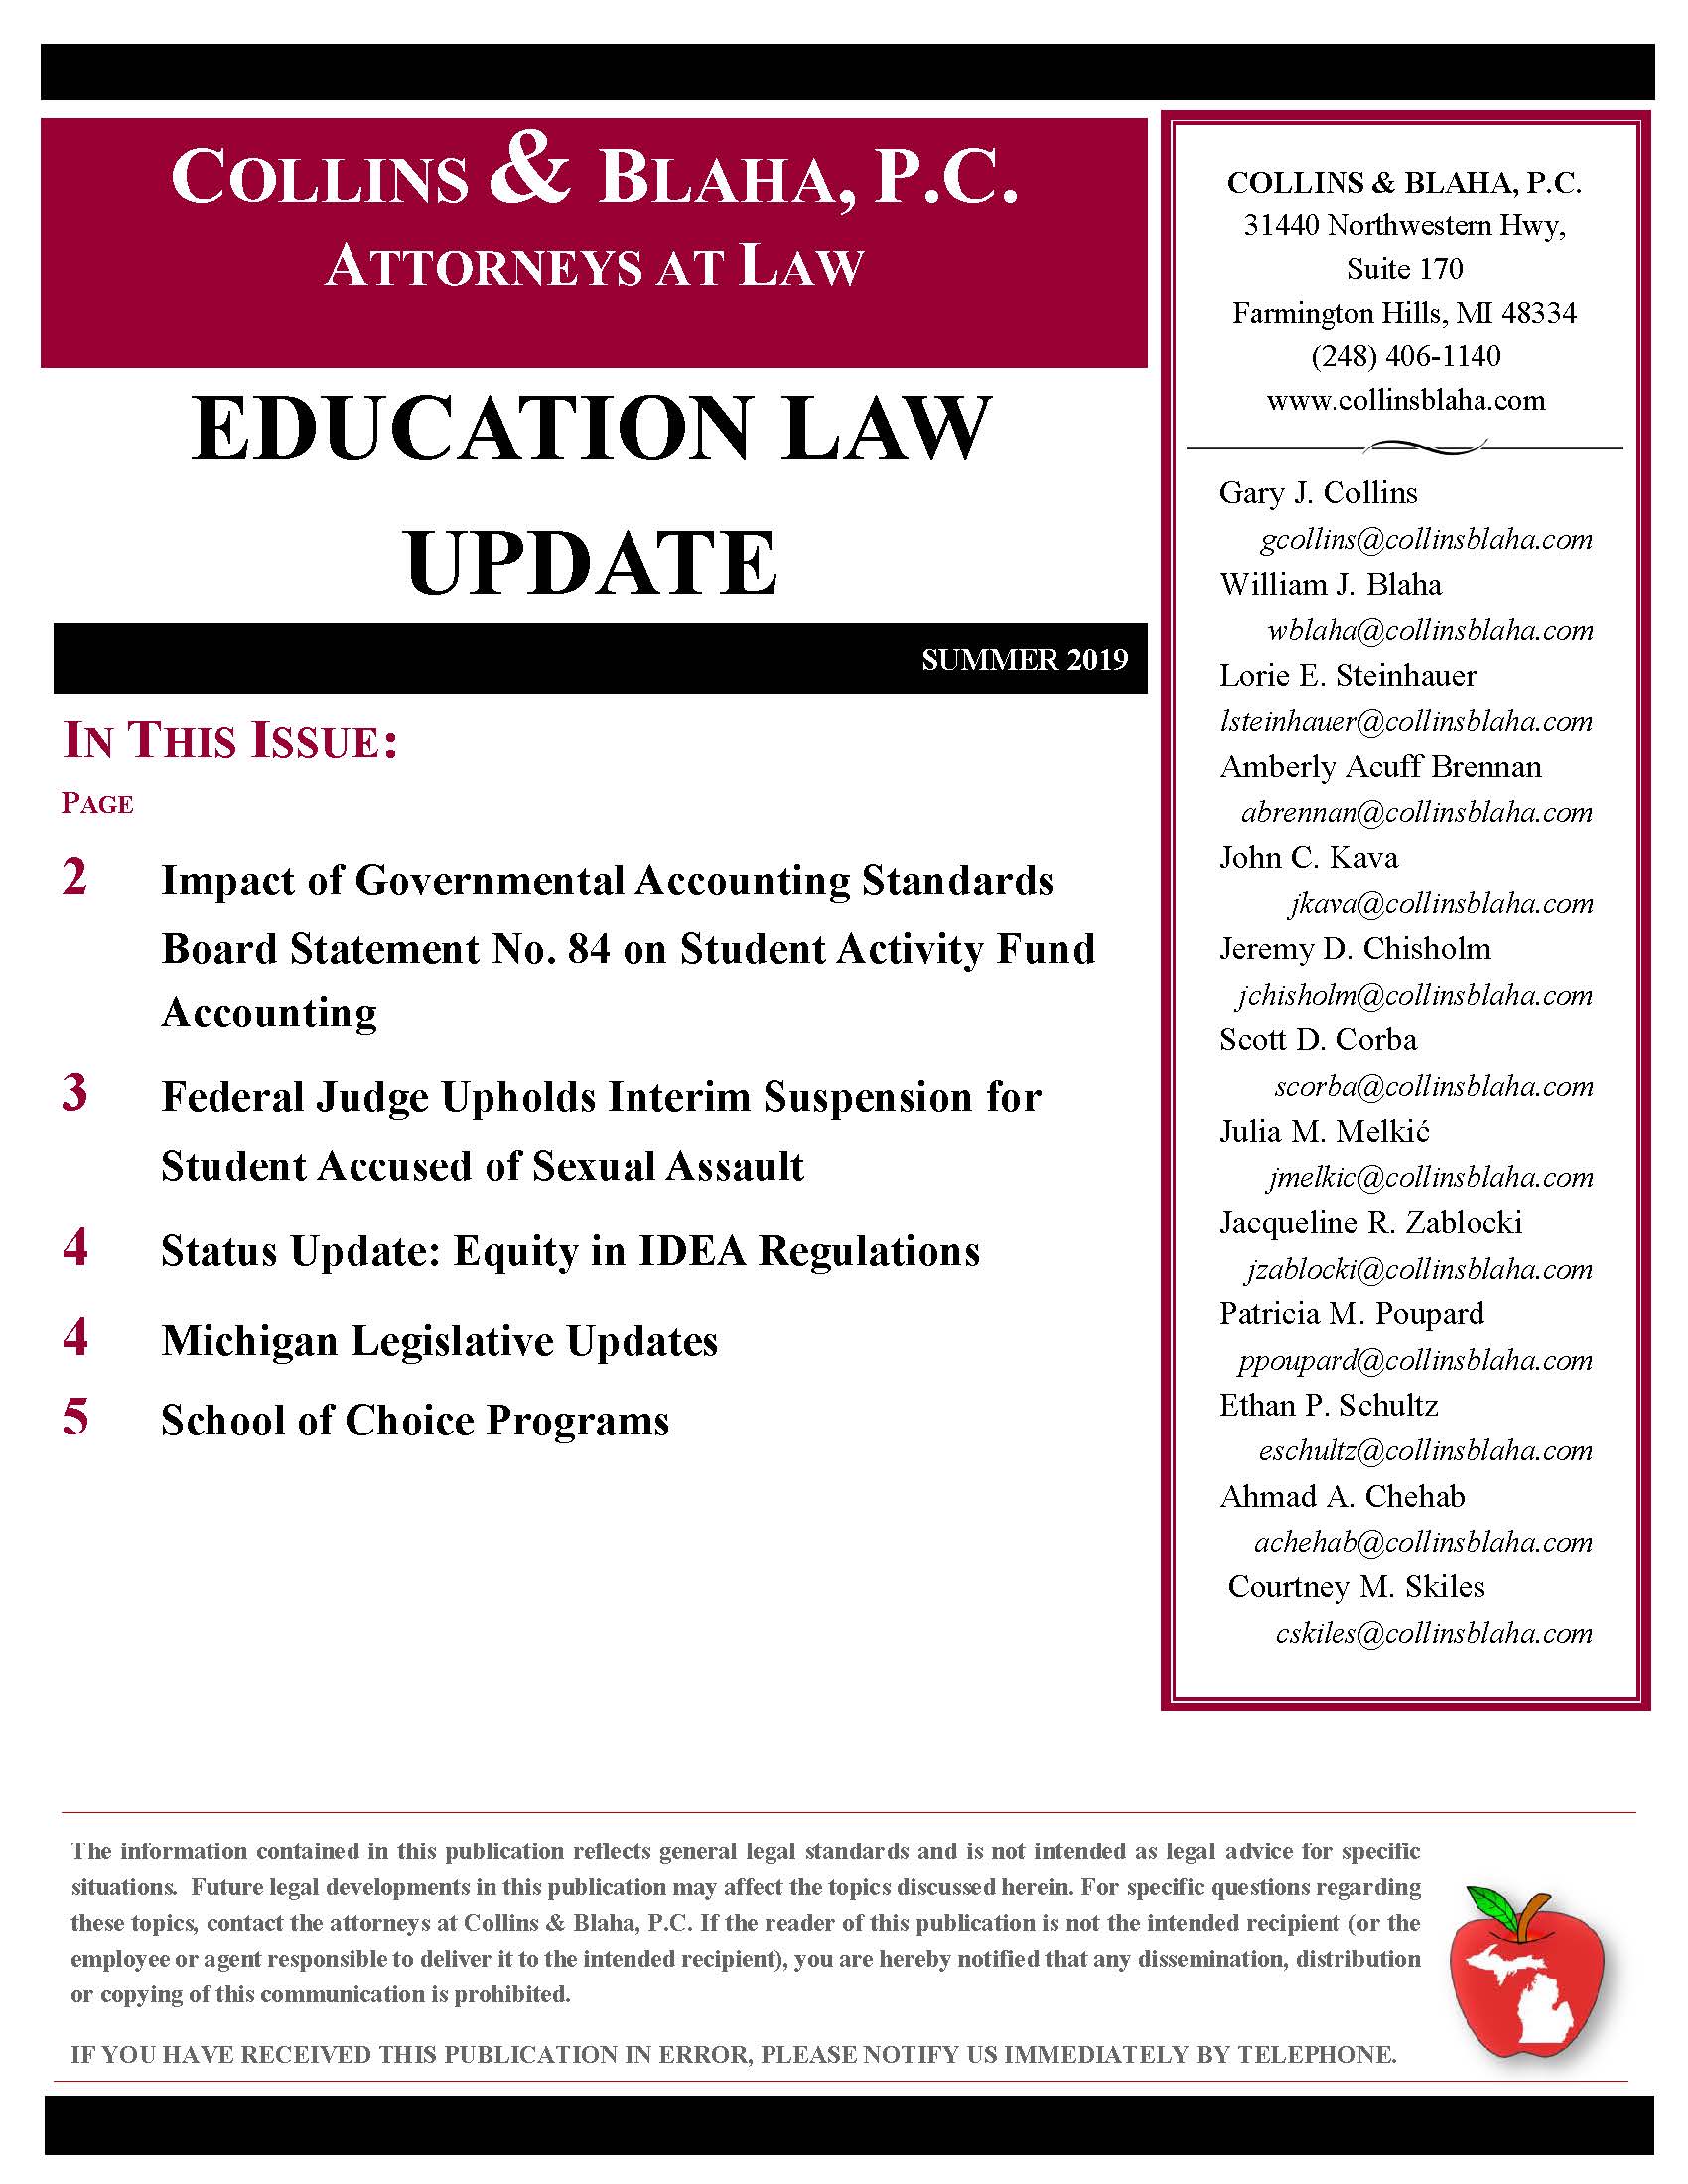 education-law-update-summer-2019_page_1